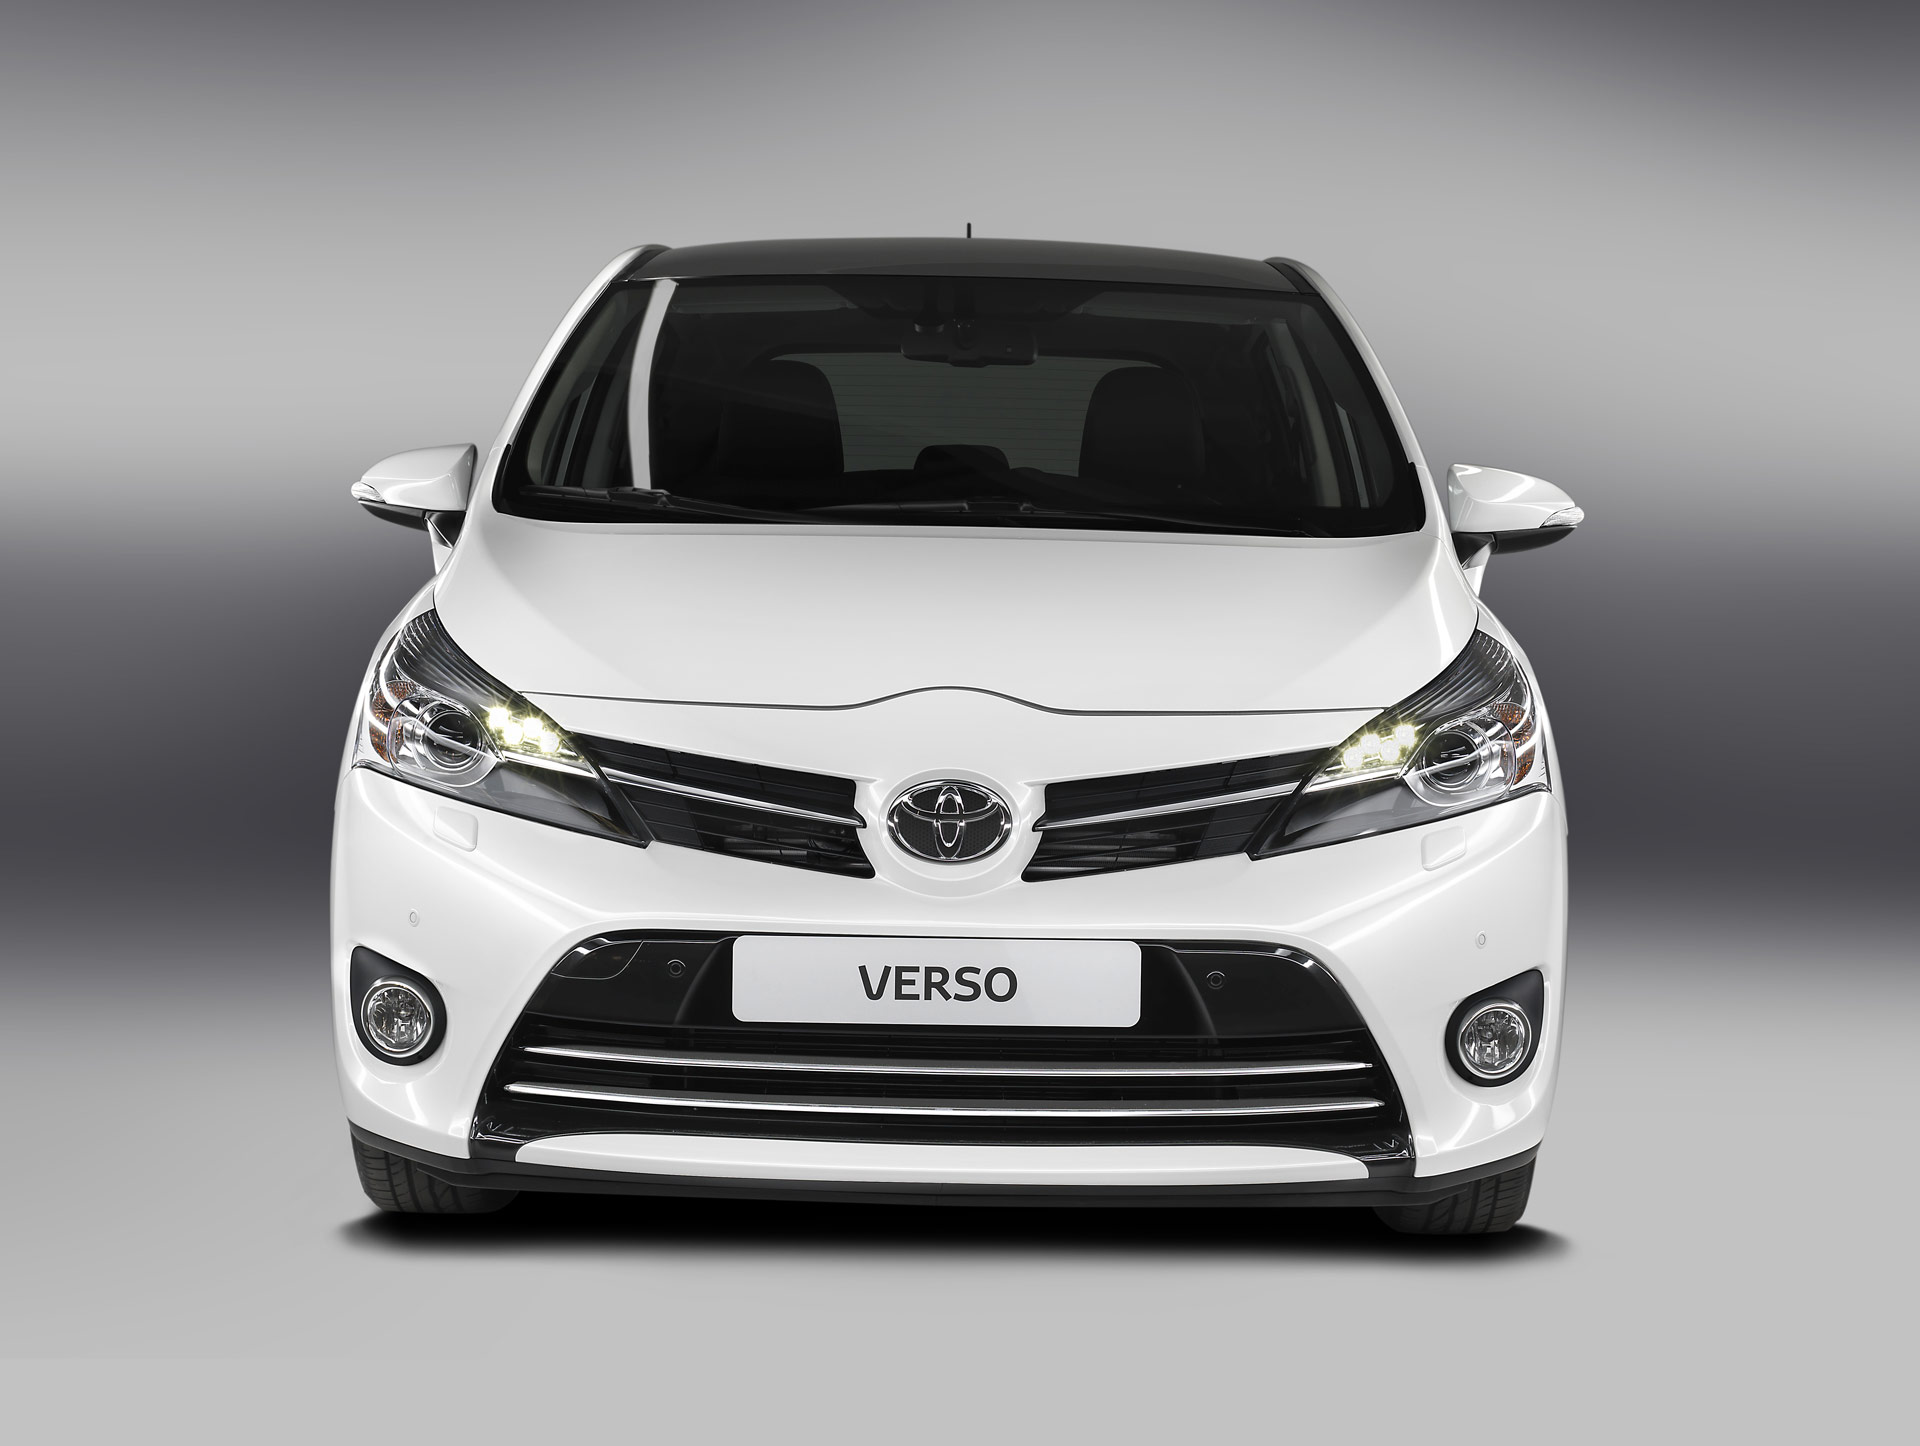 2013 Toyota Verso Wallpapers and Image Gallery